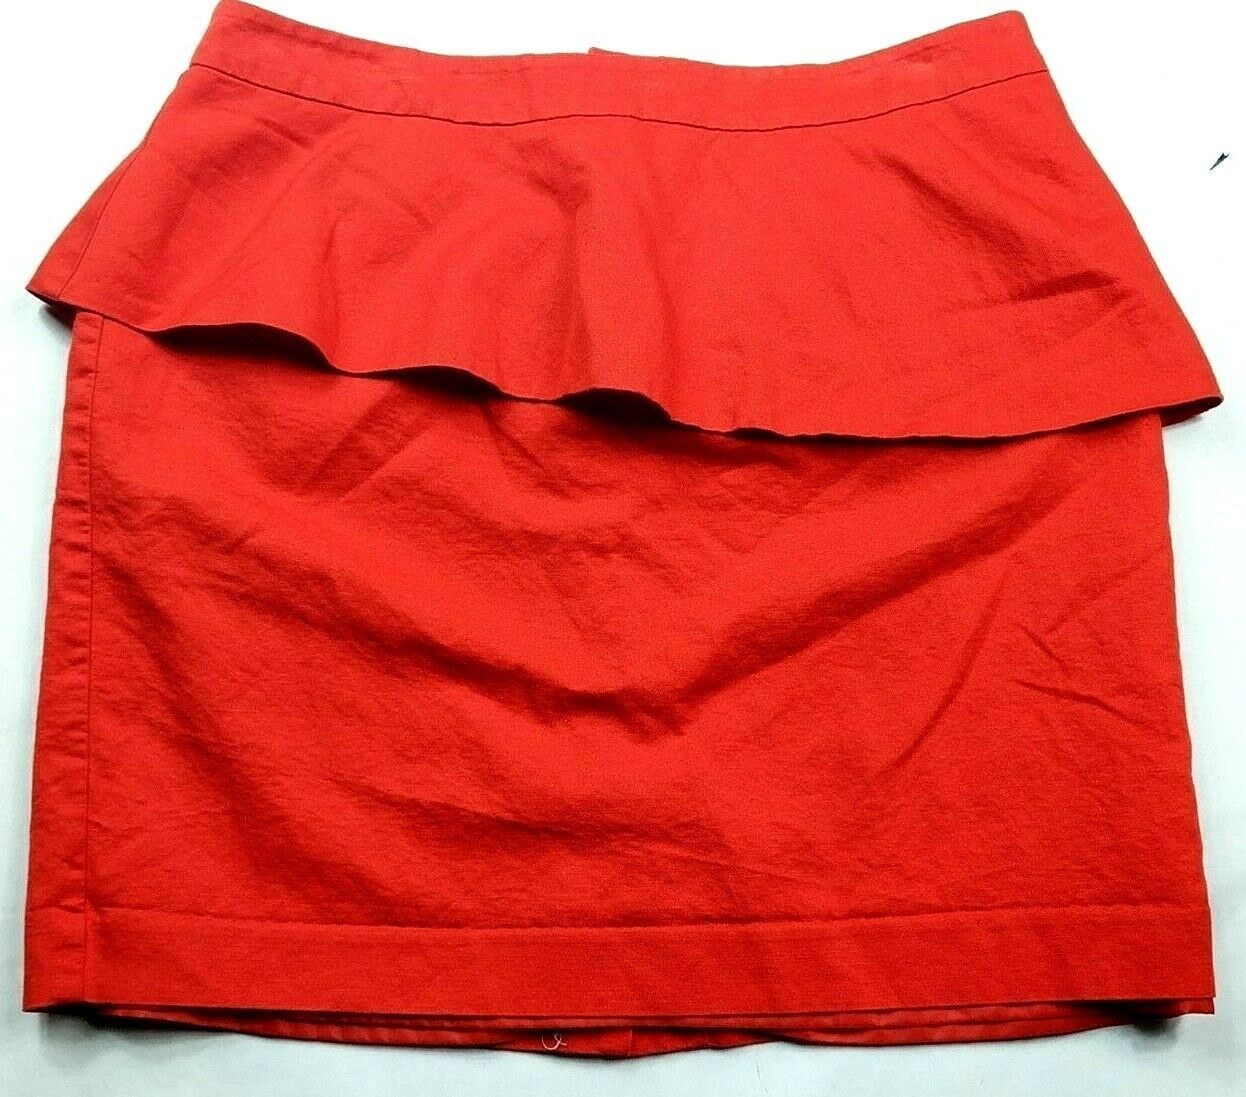 Primary image for Loft Womens A Line Tiered Skirt Size 12 Solid Red Back Zip Lined